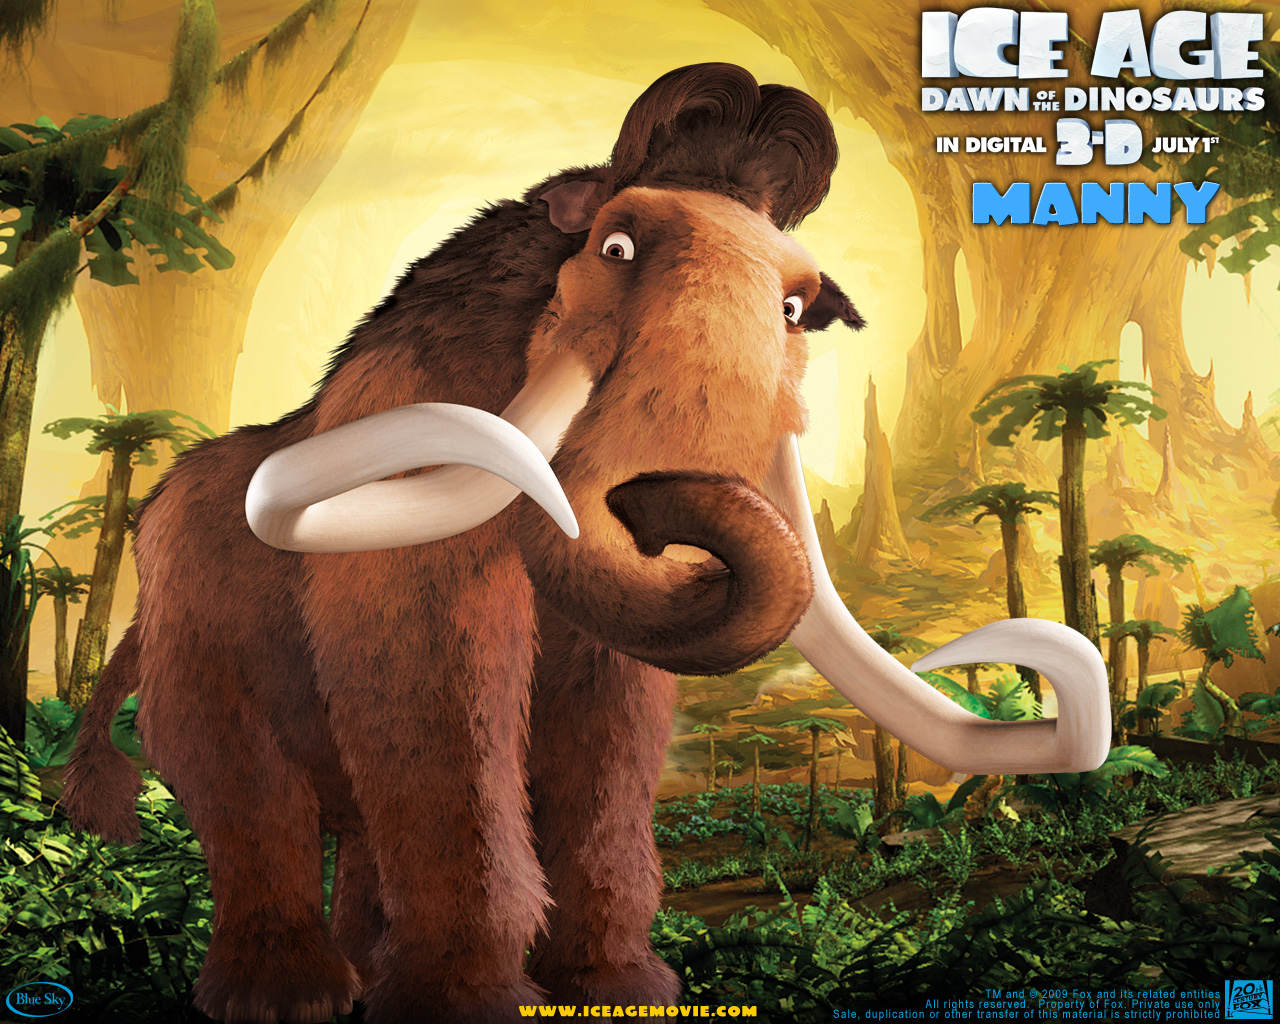 Download High quality Ice Age Dawn Of The Dinosaurs wallpaper / Cartoons / 1280x1024